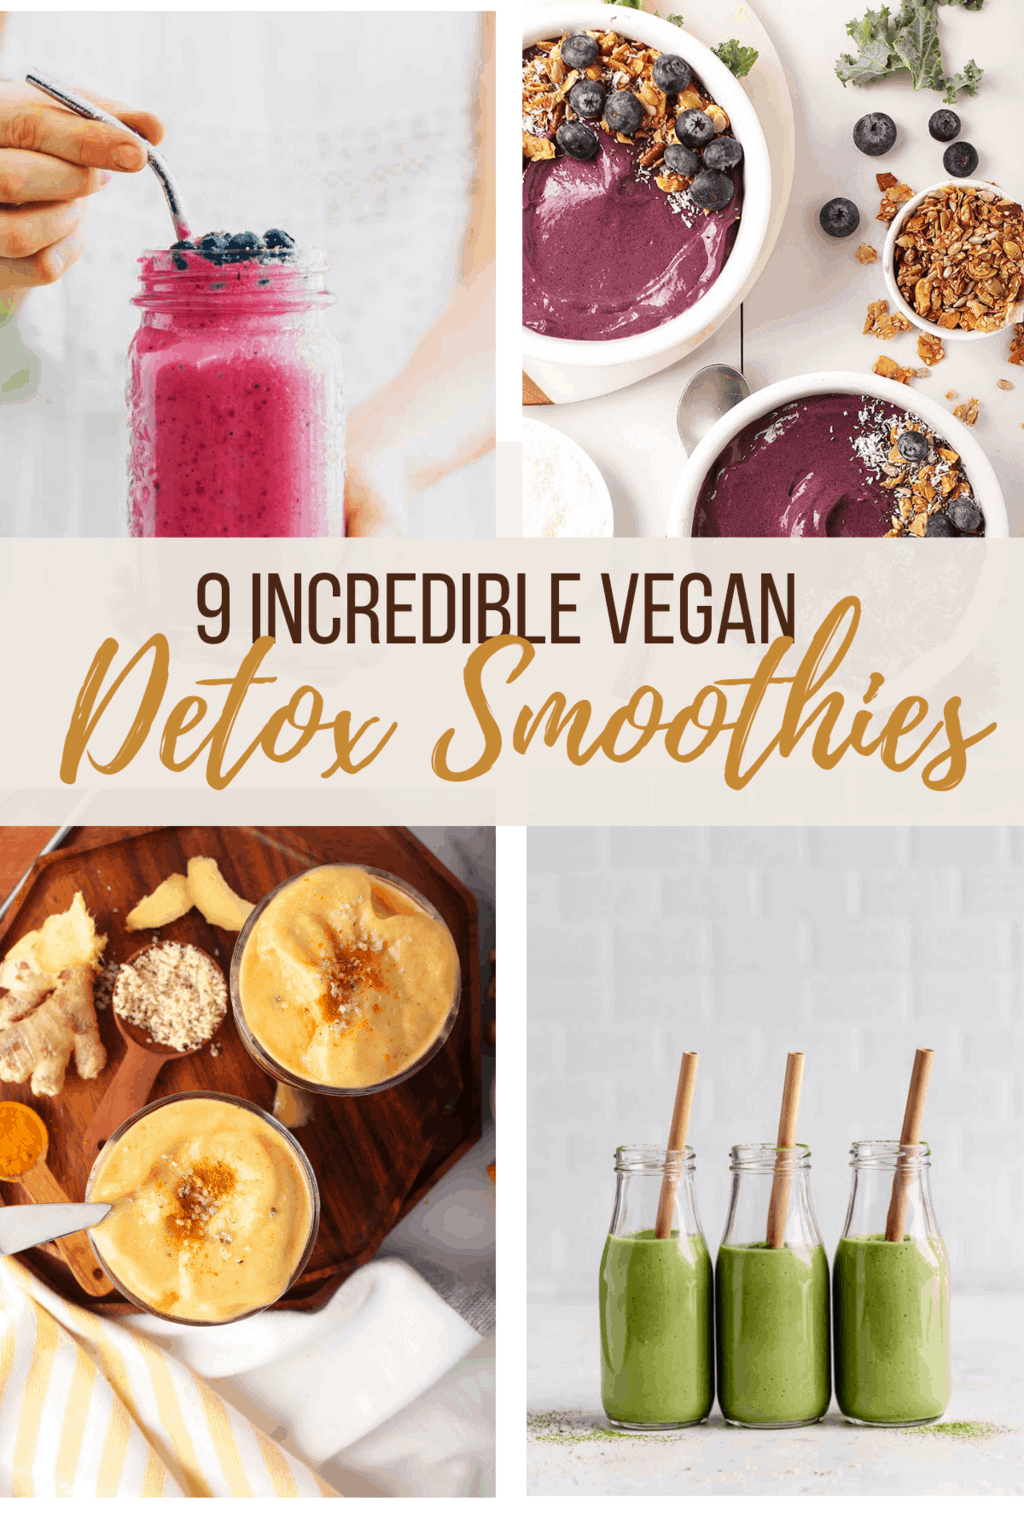 Detox Smoothie Recipe For Weight Loss - Post Holiday Detox Drink